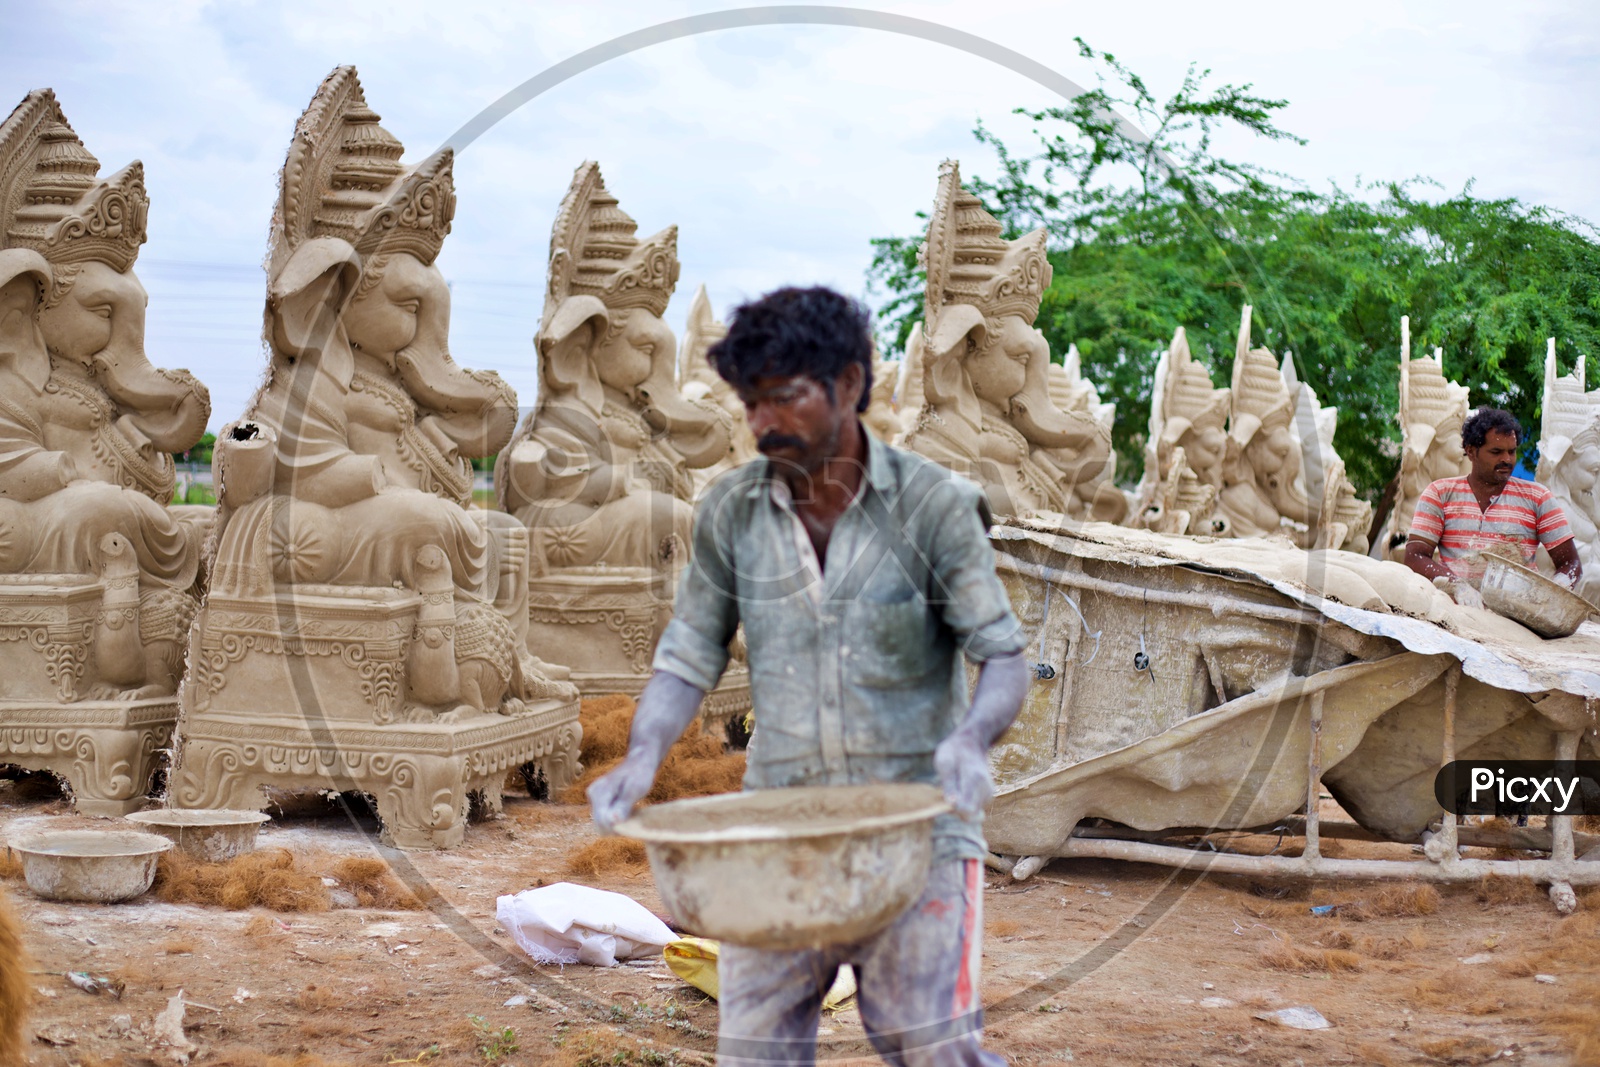 Vinayaka statues being made by plaster of paris.